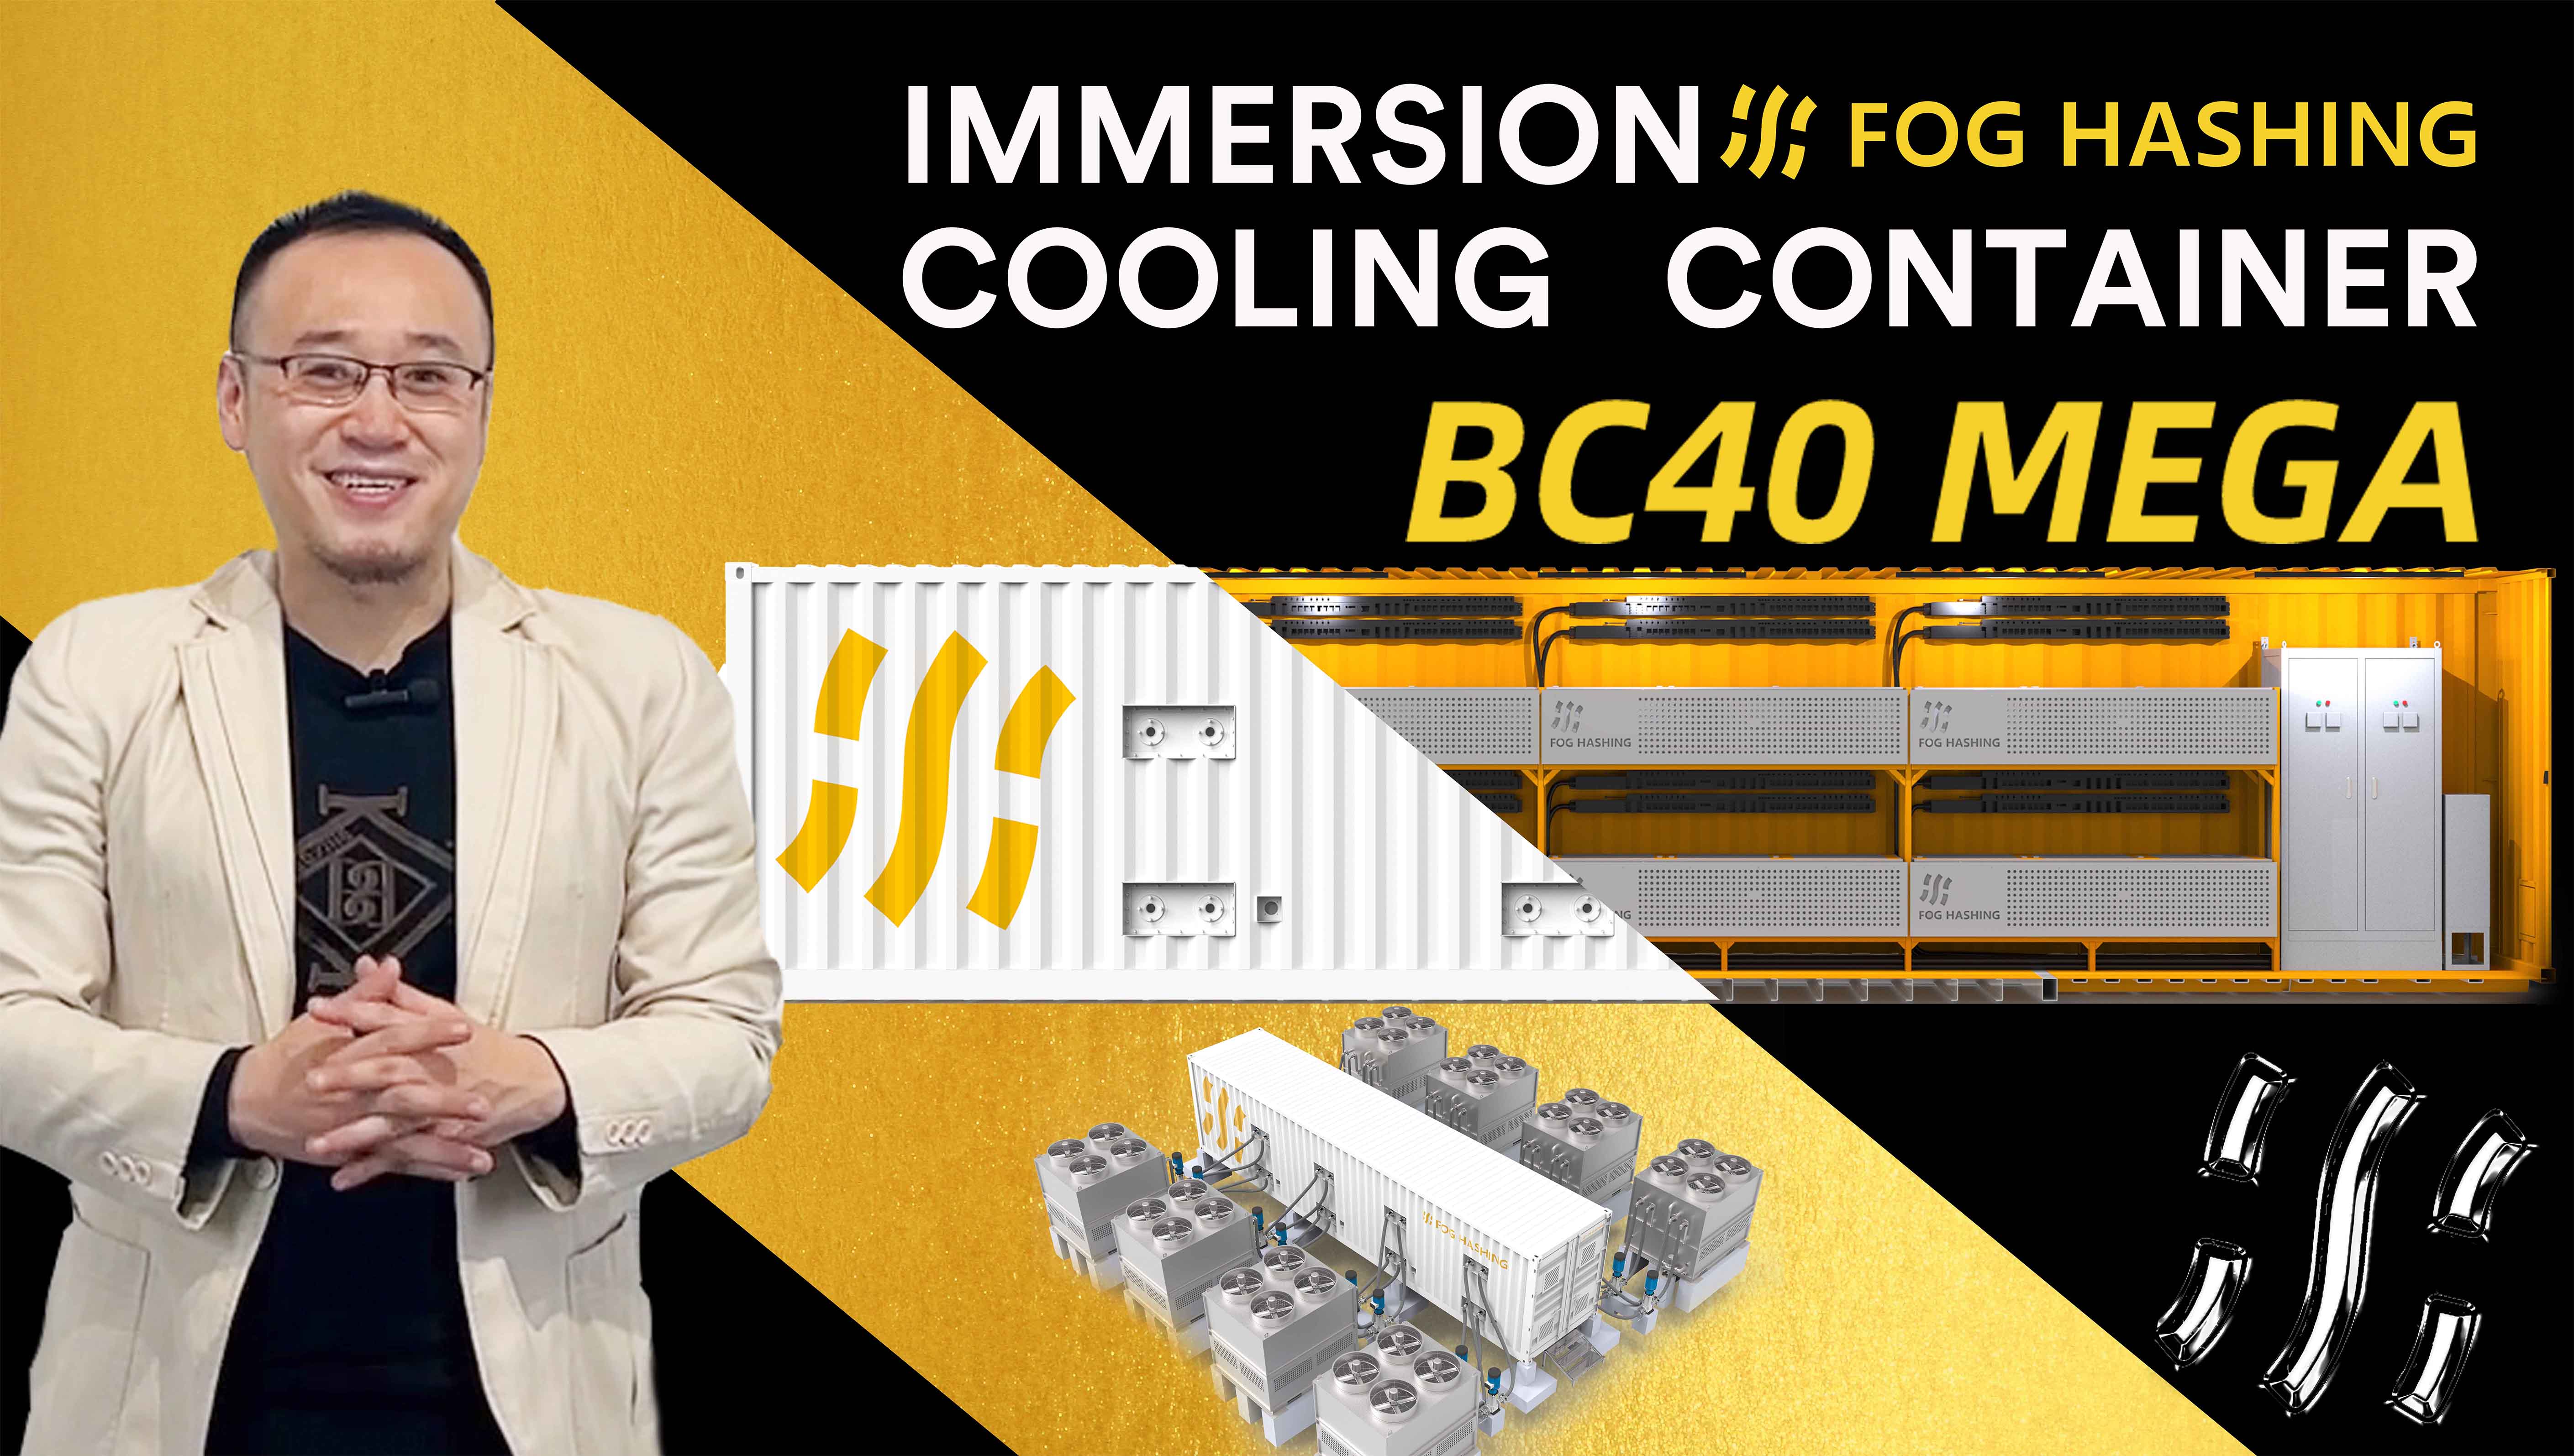 A video of Immersion Mining Container BC40 MEGA